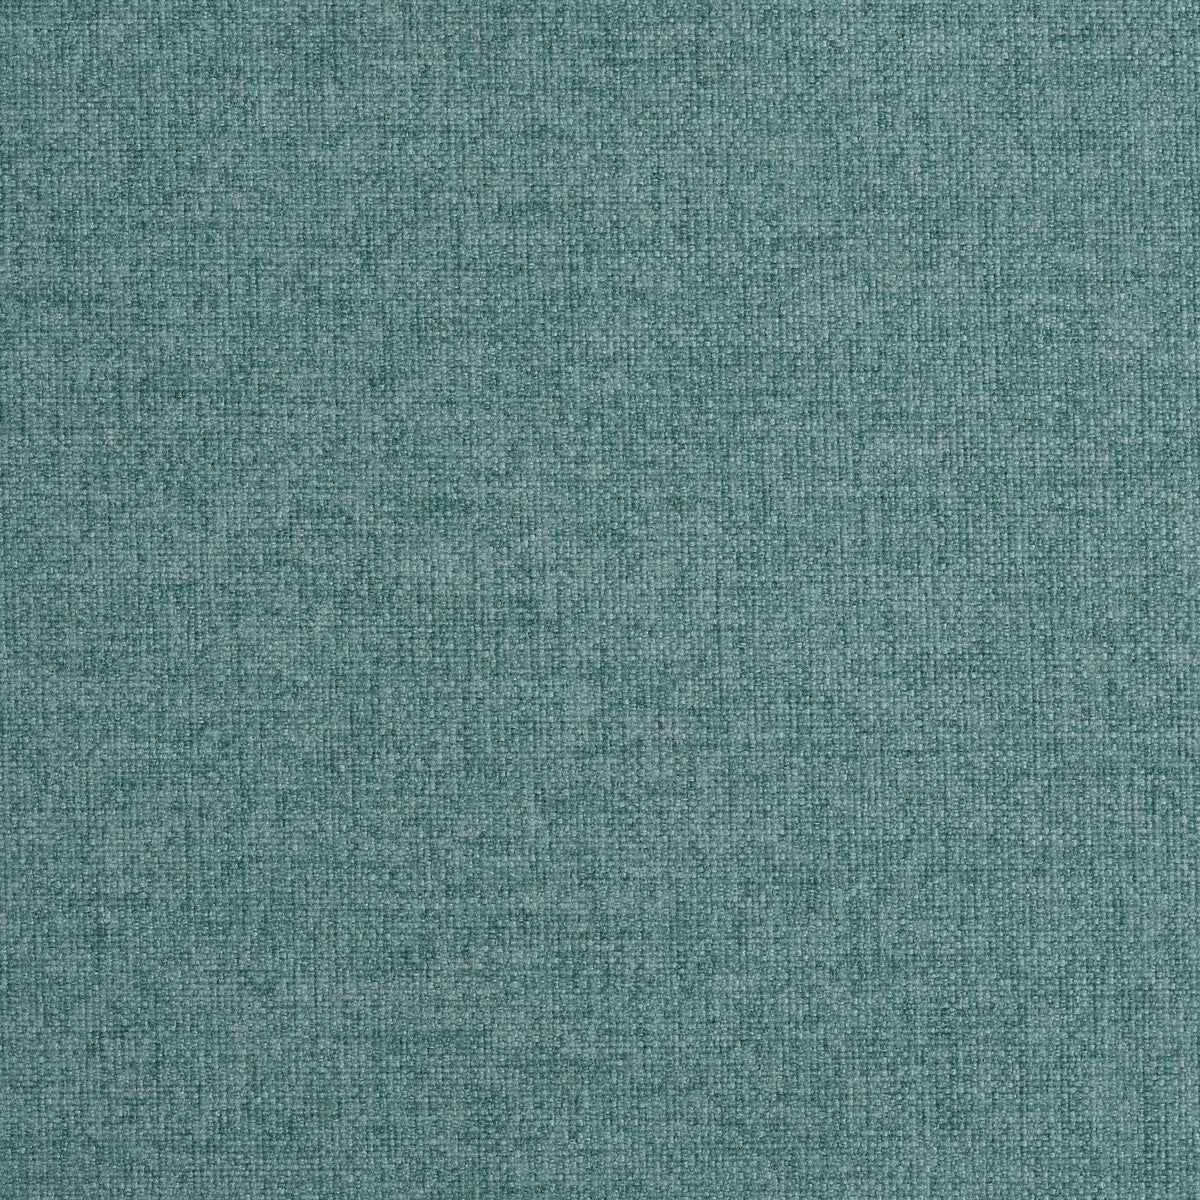 Kravet Contract fabric in 35122-35 color - pattern 35122.35.0 - by Kravet Contract in the Crypton Incase collection